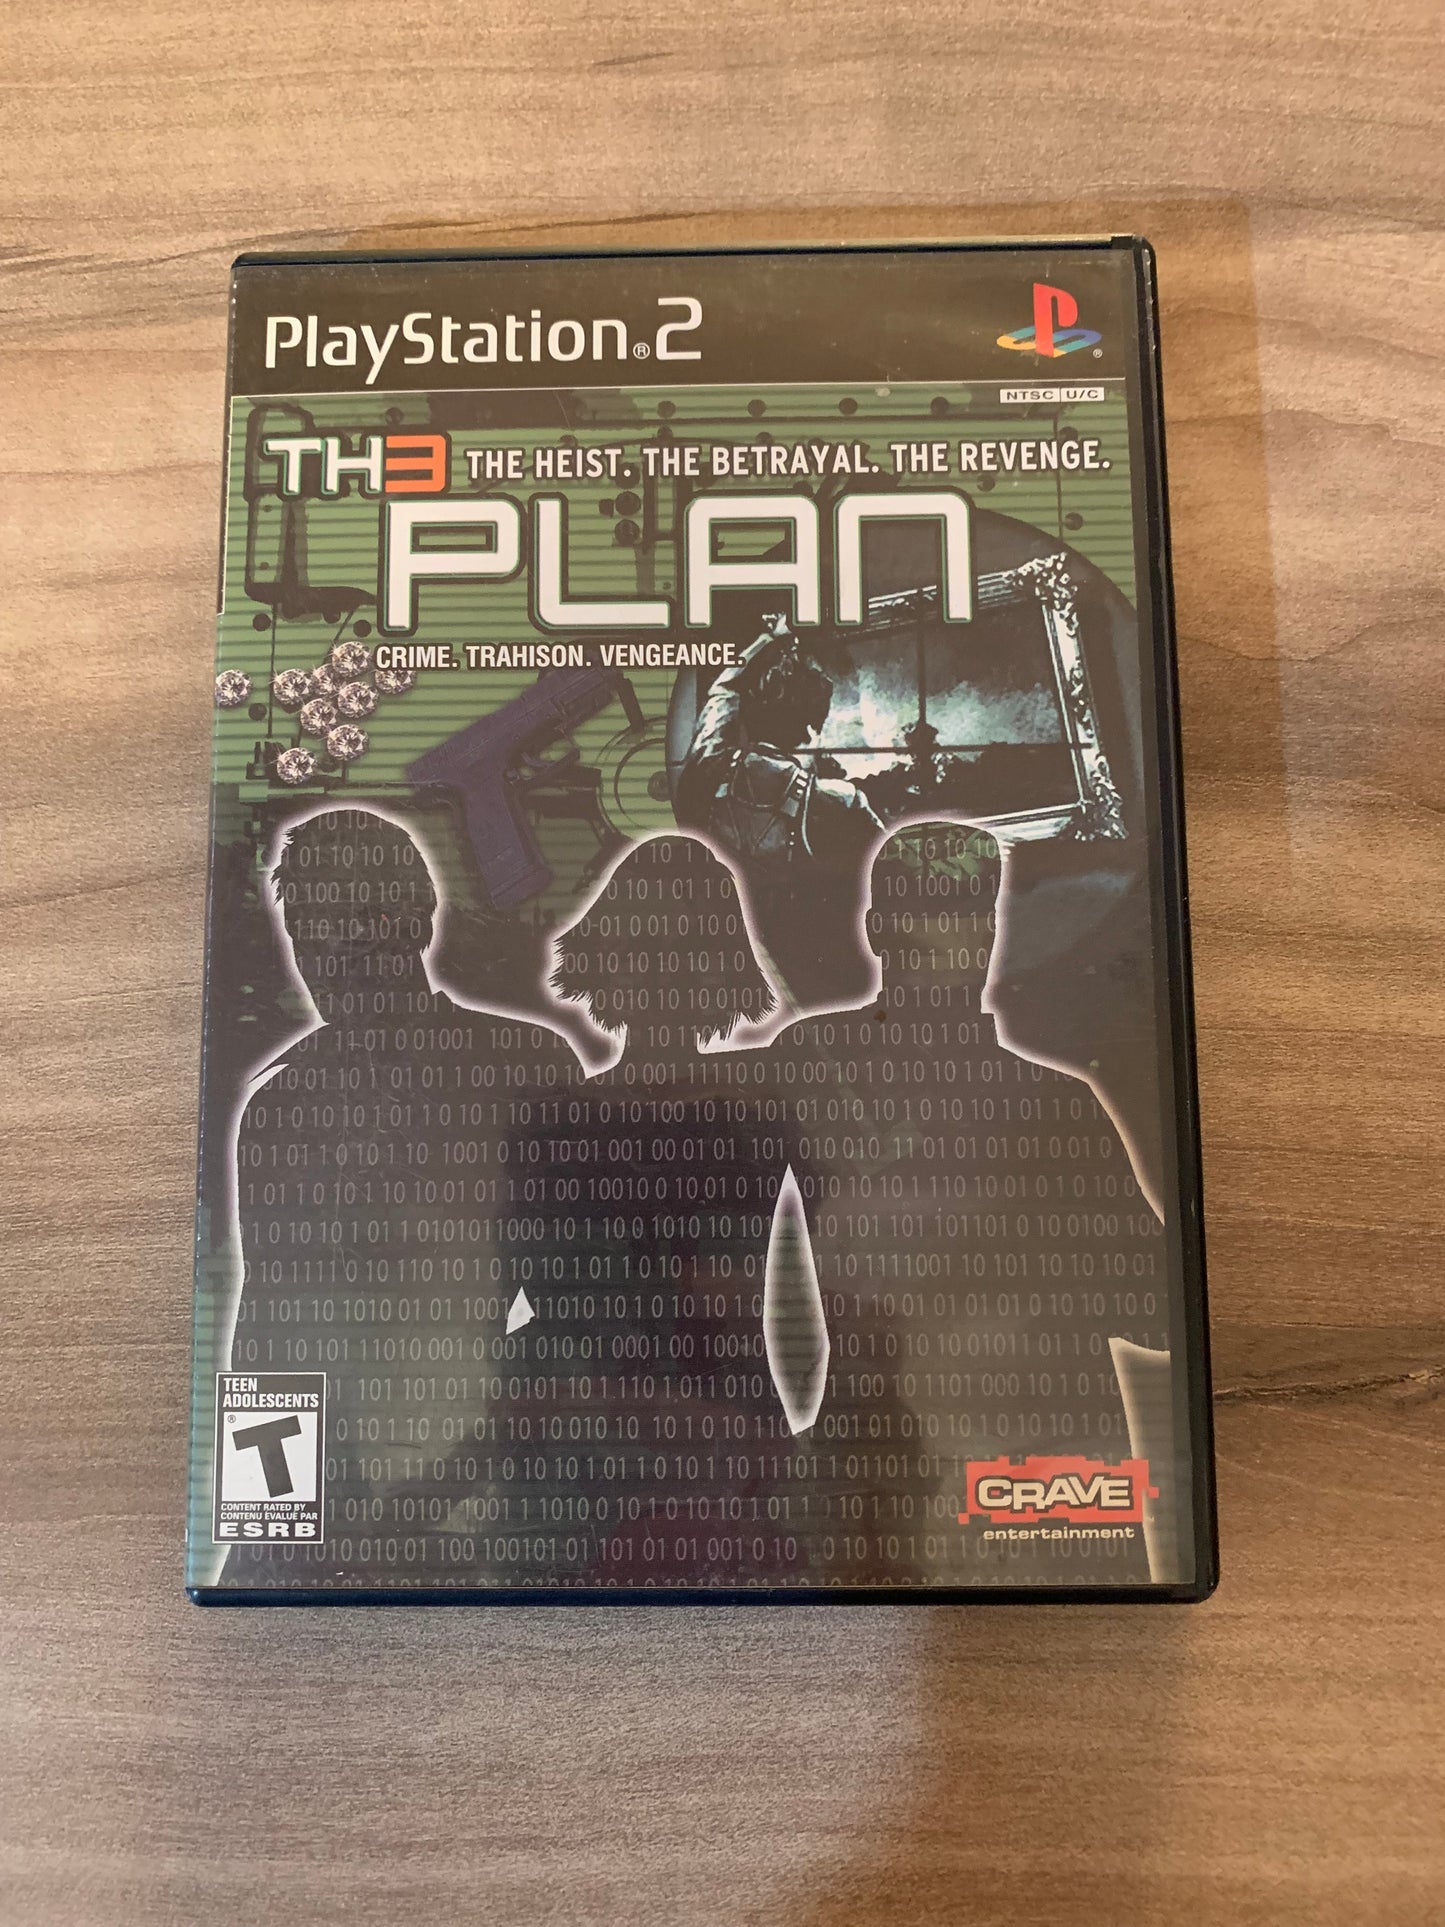 SONY PLAYSTATiON 2 [PS2] | TH3 (THE) PLAN